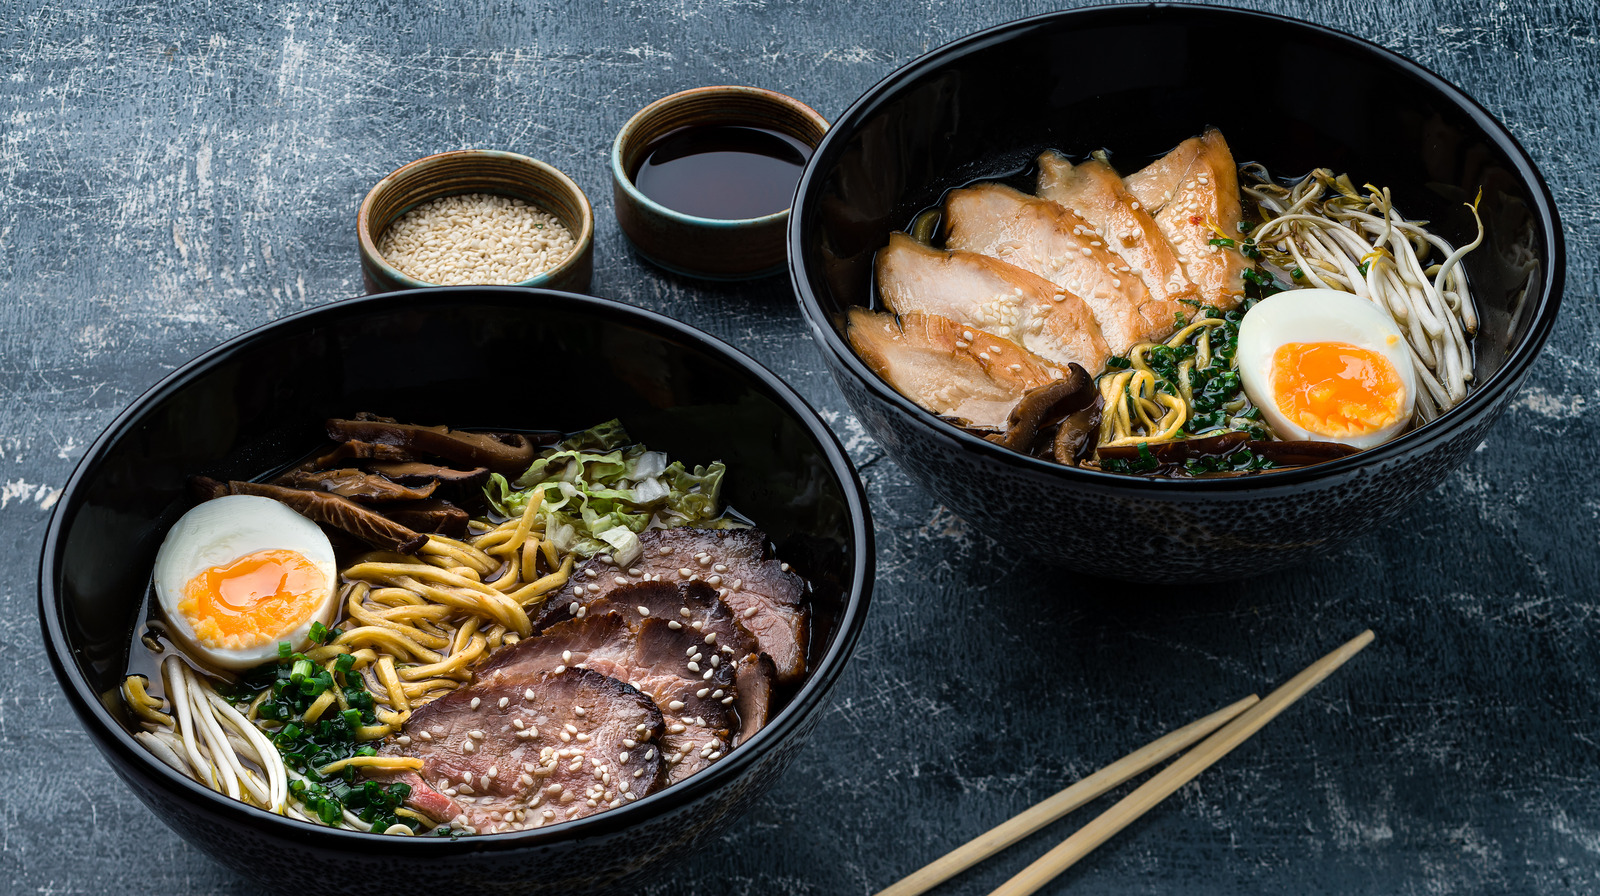 What Makes Japanese Ramen Different From Chinese Ramen